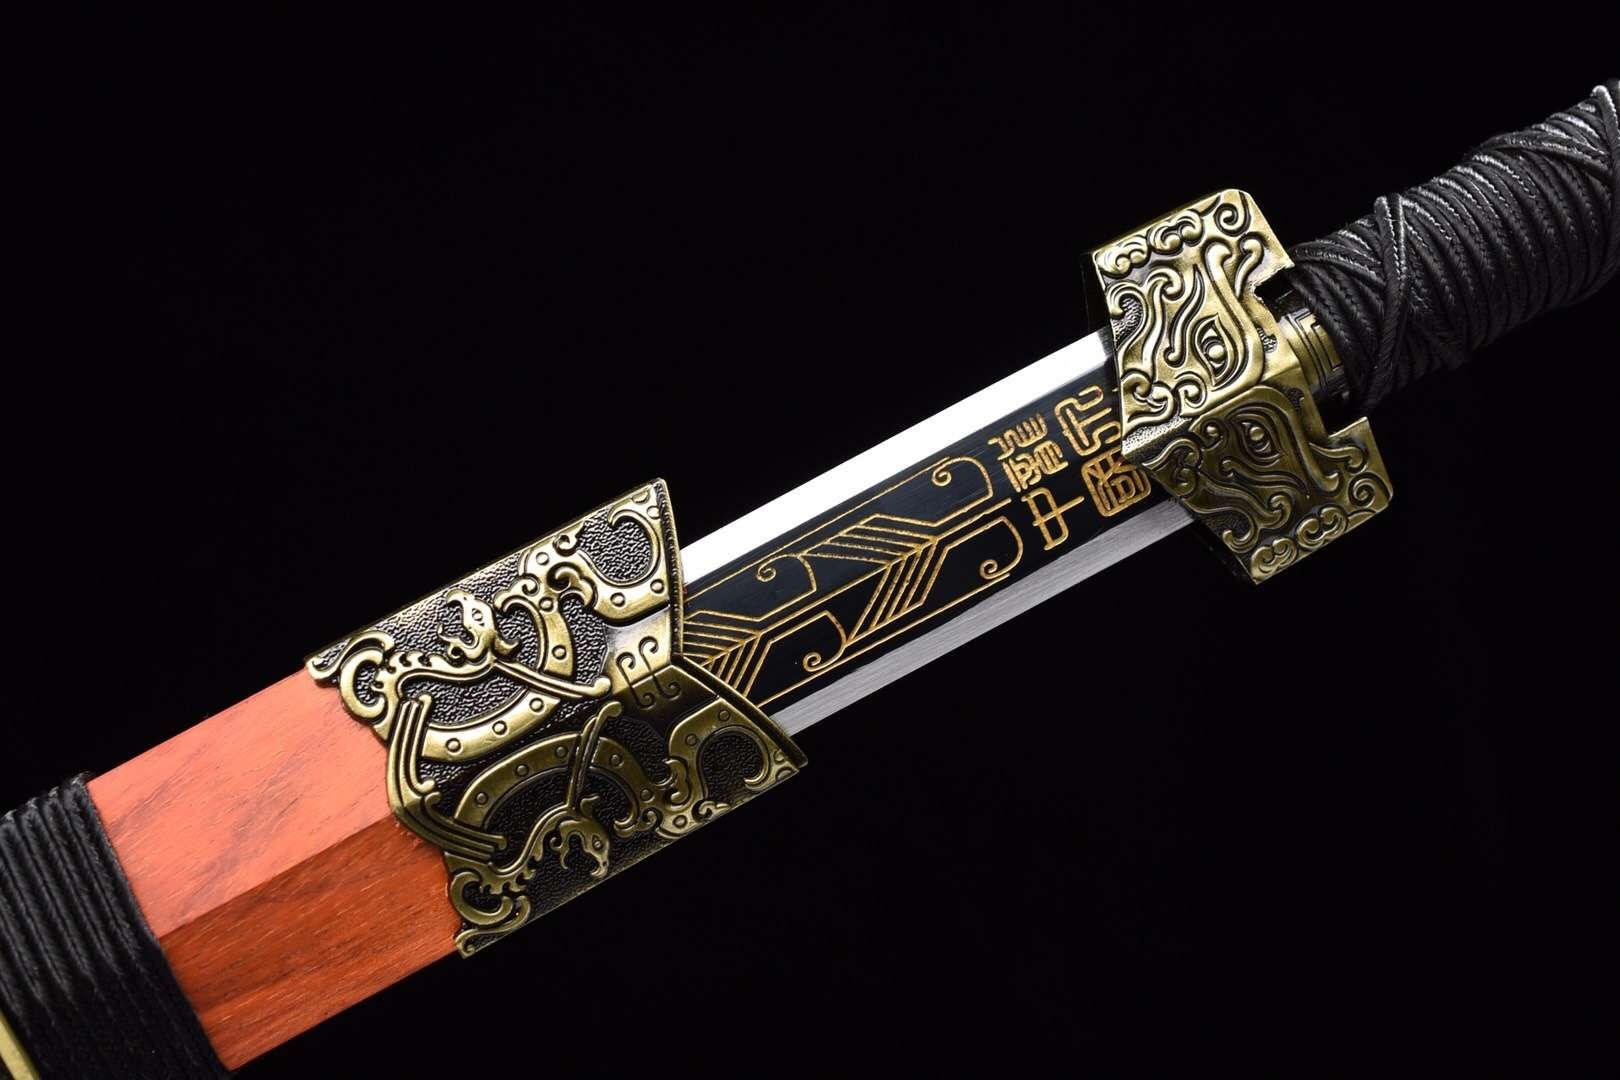 Han jian sword,High carbon steel etch blade,Red wood scabbard - Chinese sword shop